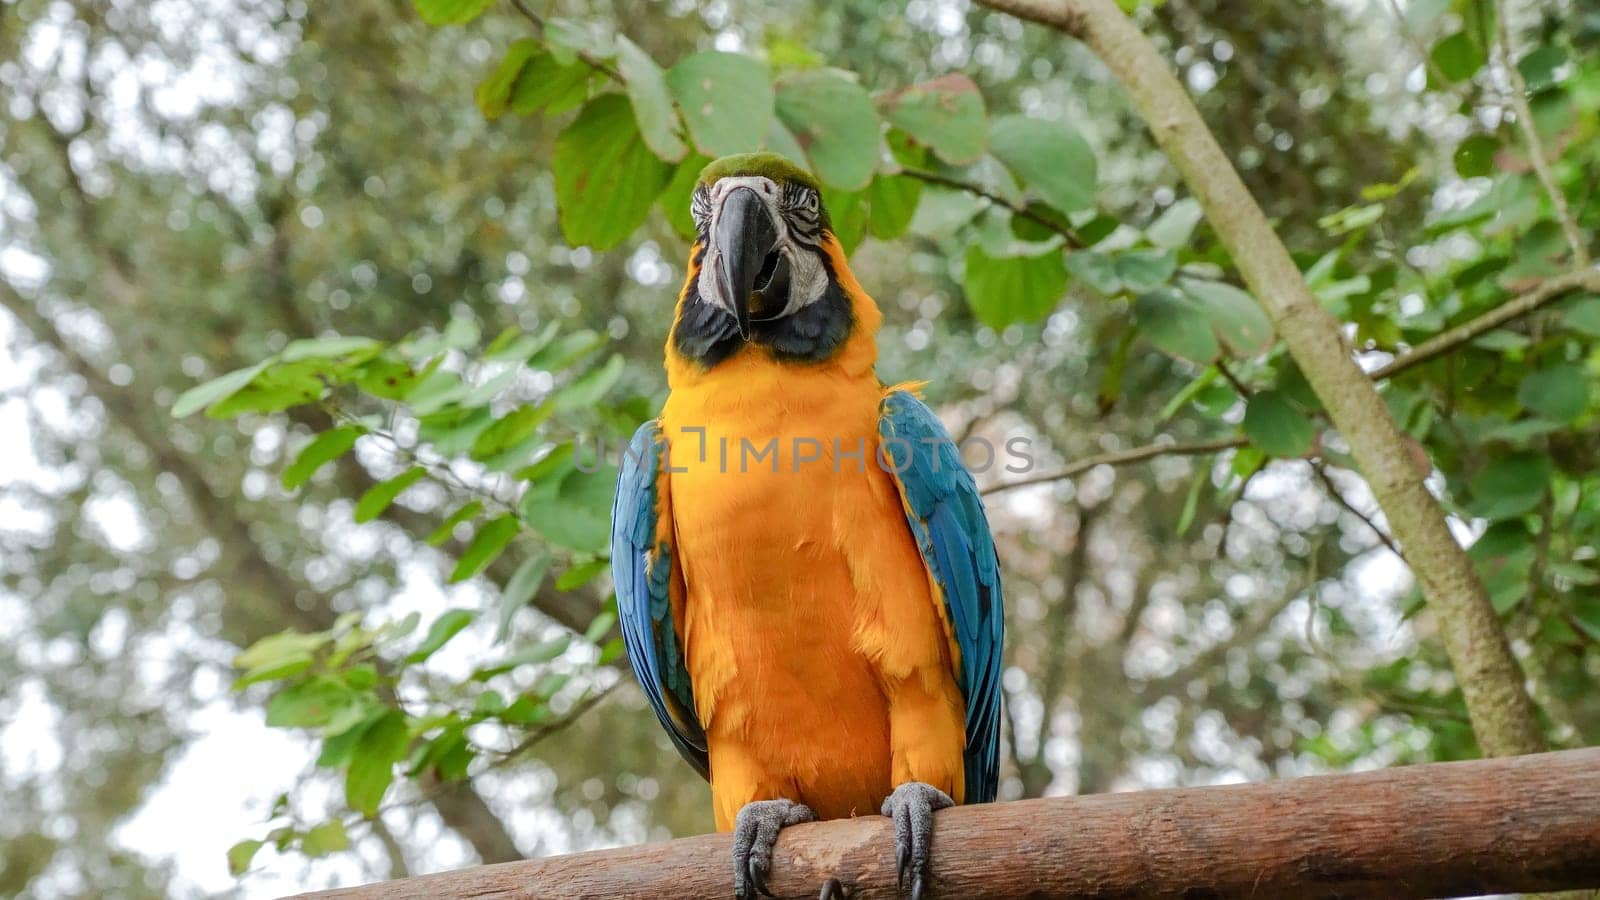 Colorful parrot perched on a tree branch with lush green leaves. The parrot has bright yellow and blue feathers and is looking directly at the camera. Its appearance is vibrant and eye-catching.